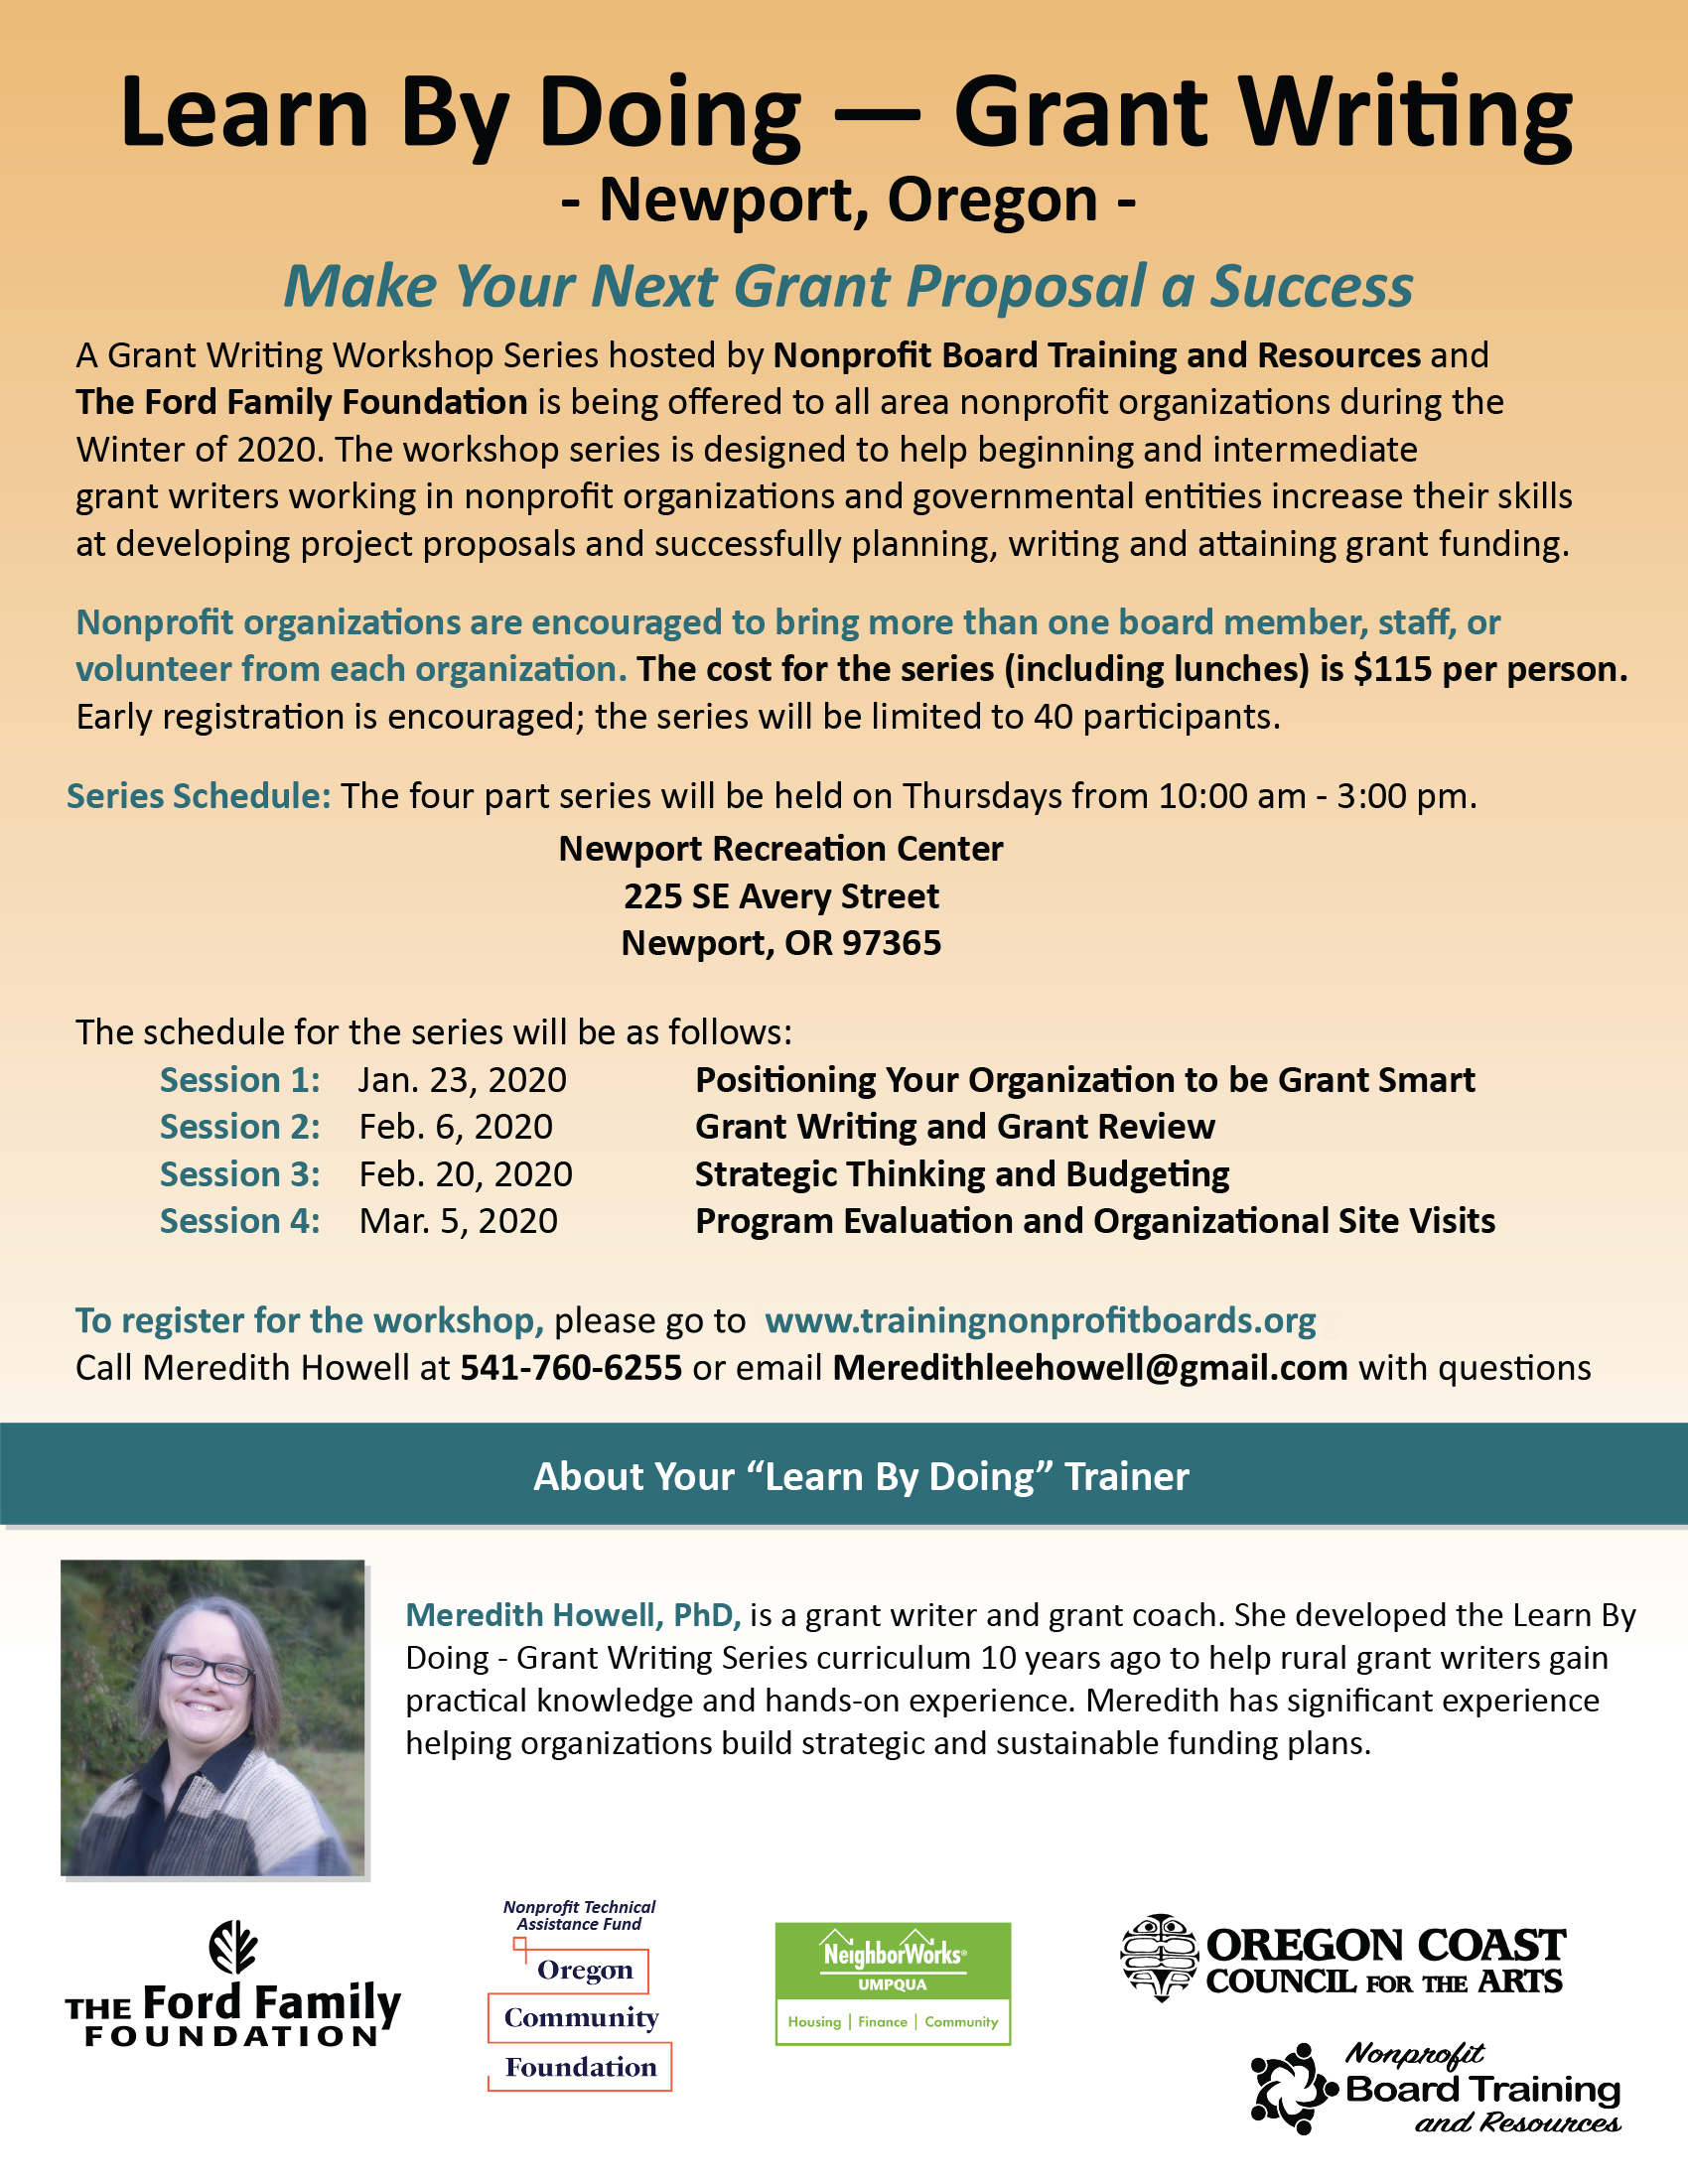 Learn by Doing Grant Writing - Oregon Coast Council for the Arts